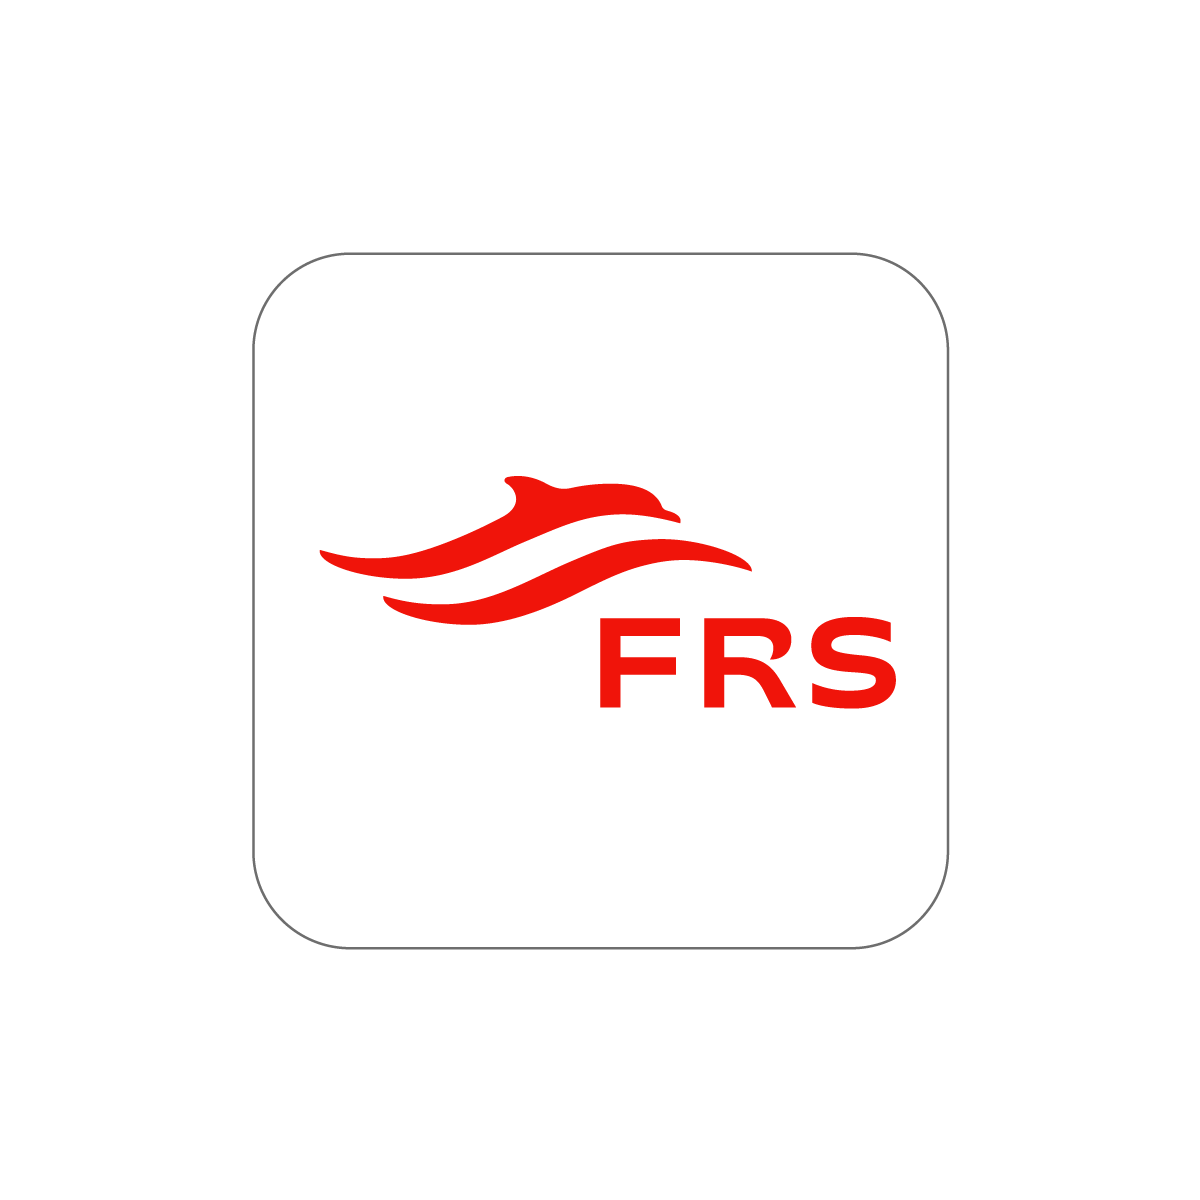 App Icon of the travel app FRS Travel.